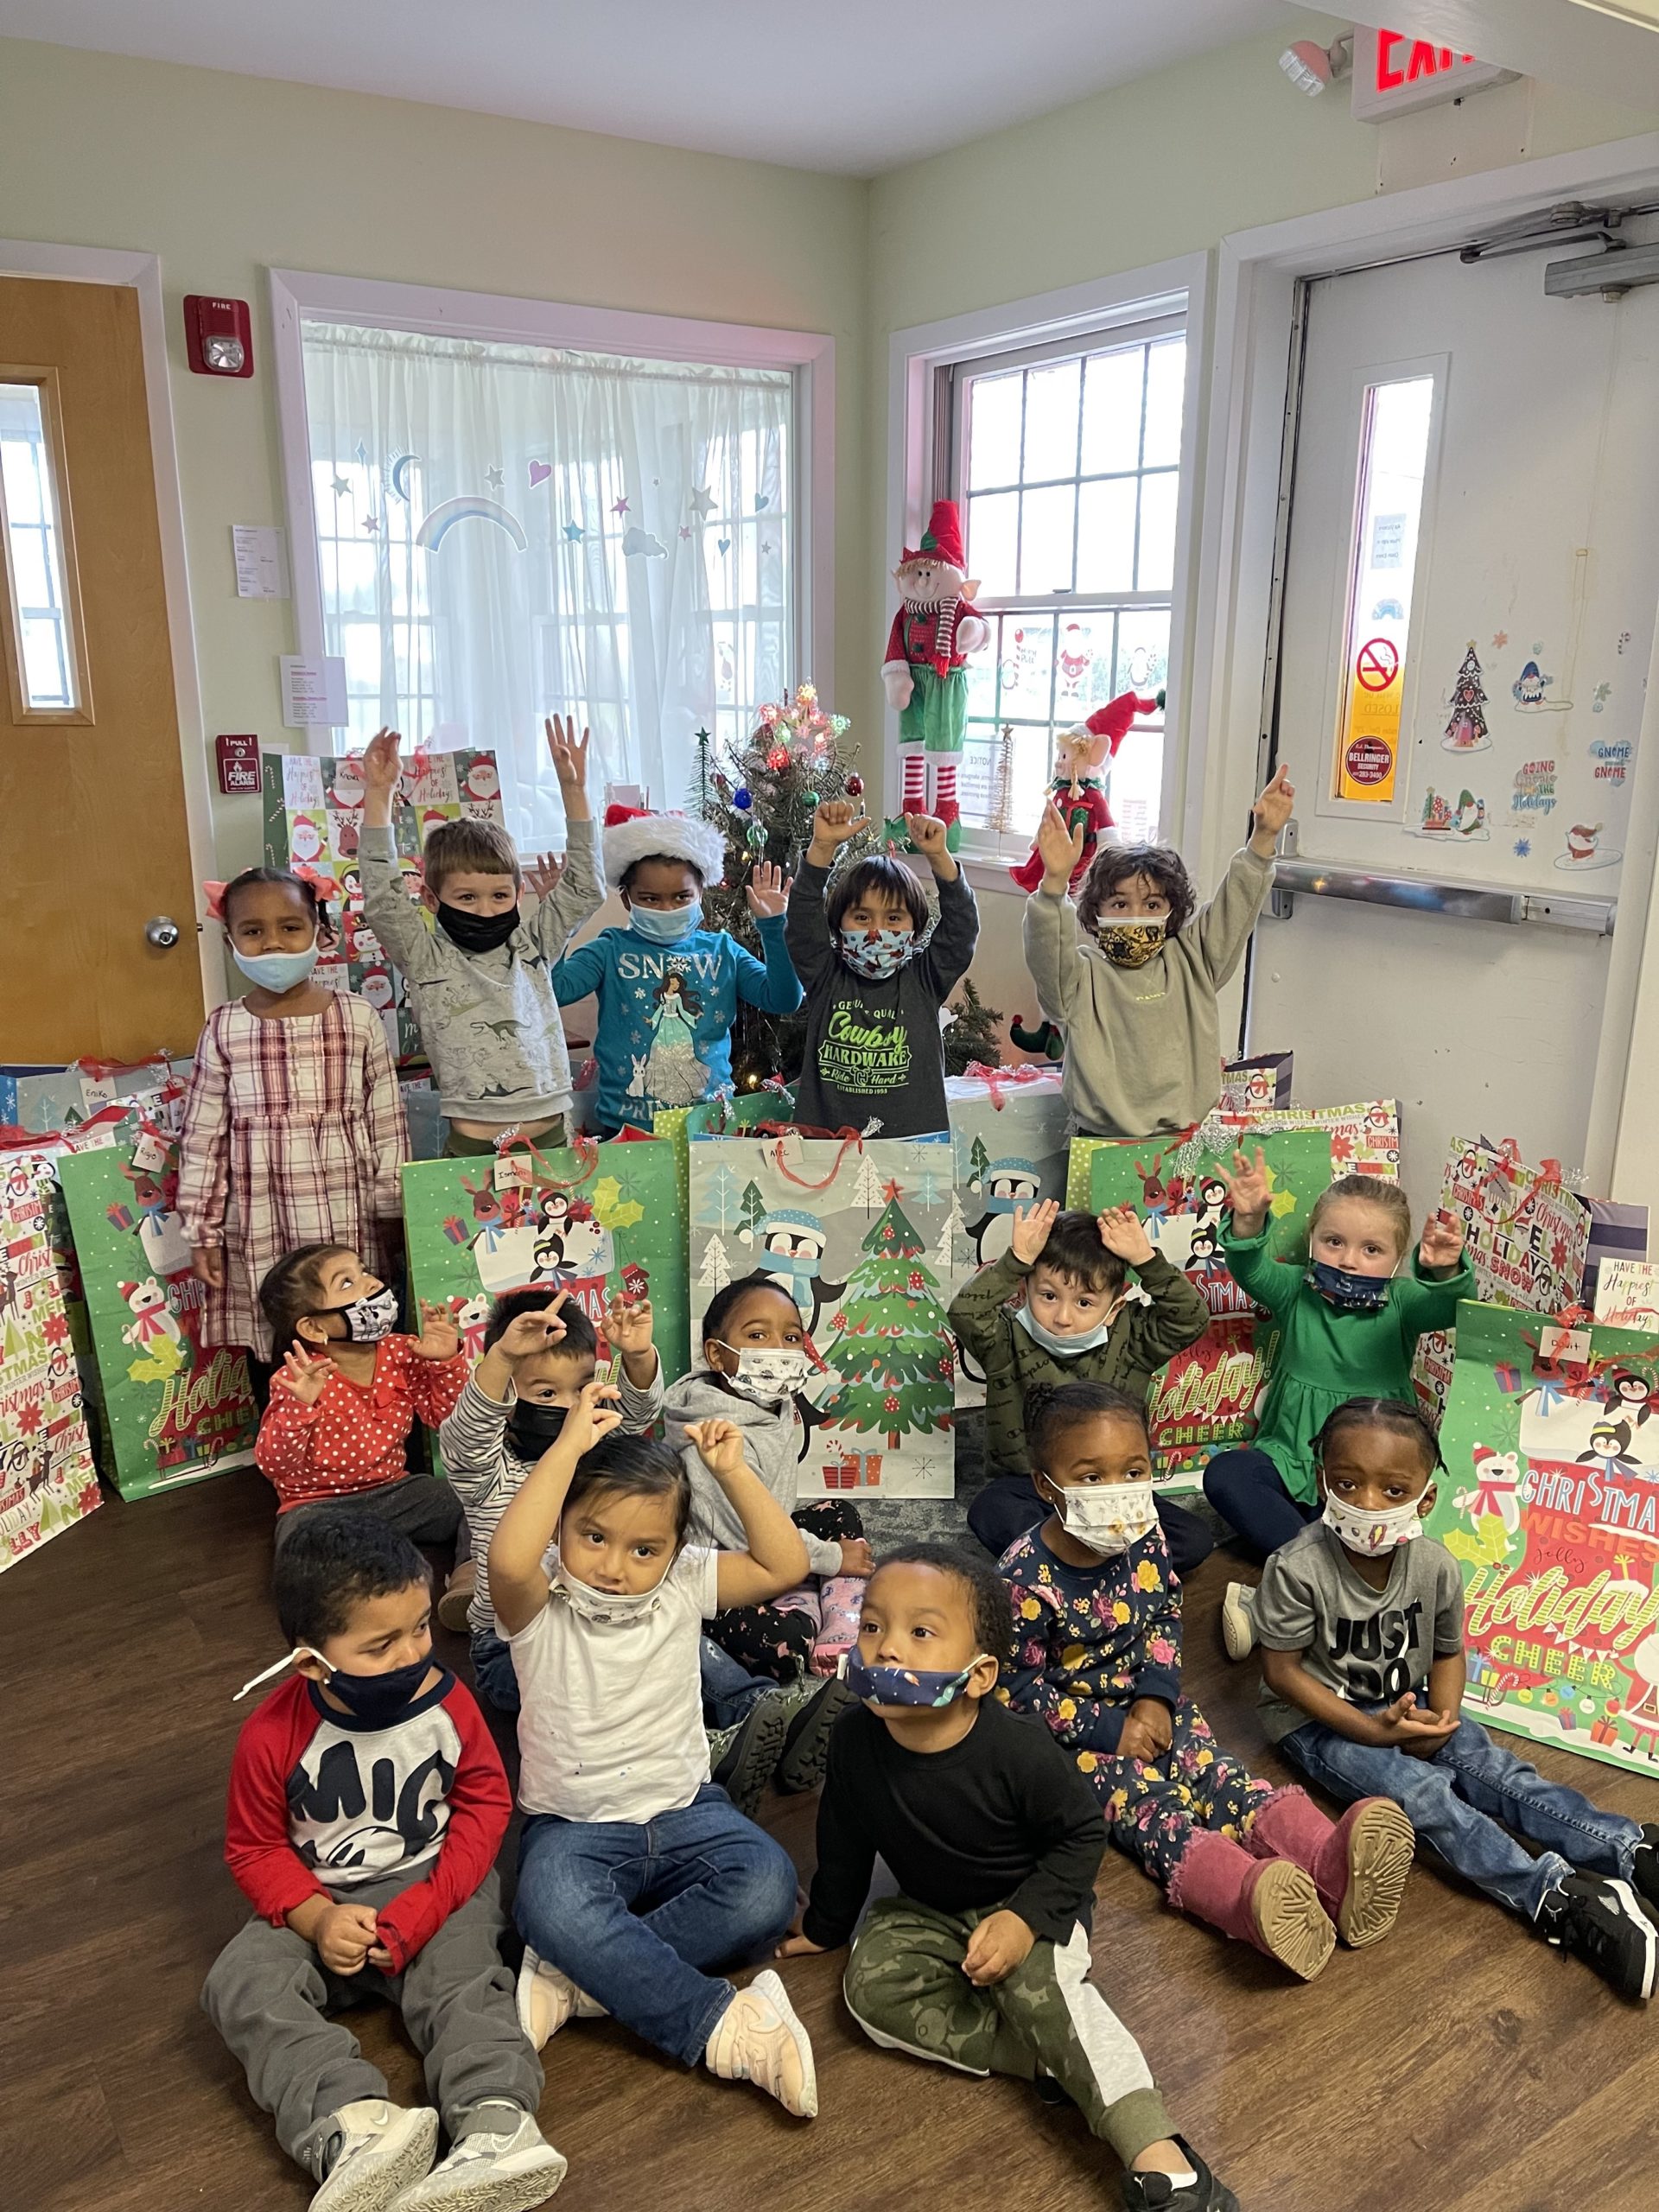 Brianna Ottati, a Douglas Elliman agent, organized a personalized holiday drive for the children at Southampton Day Care Center.